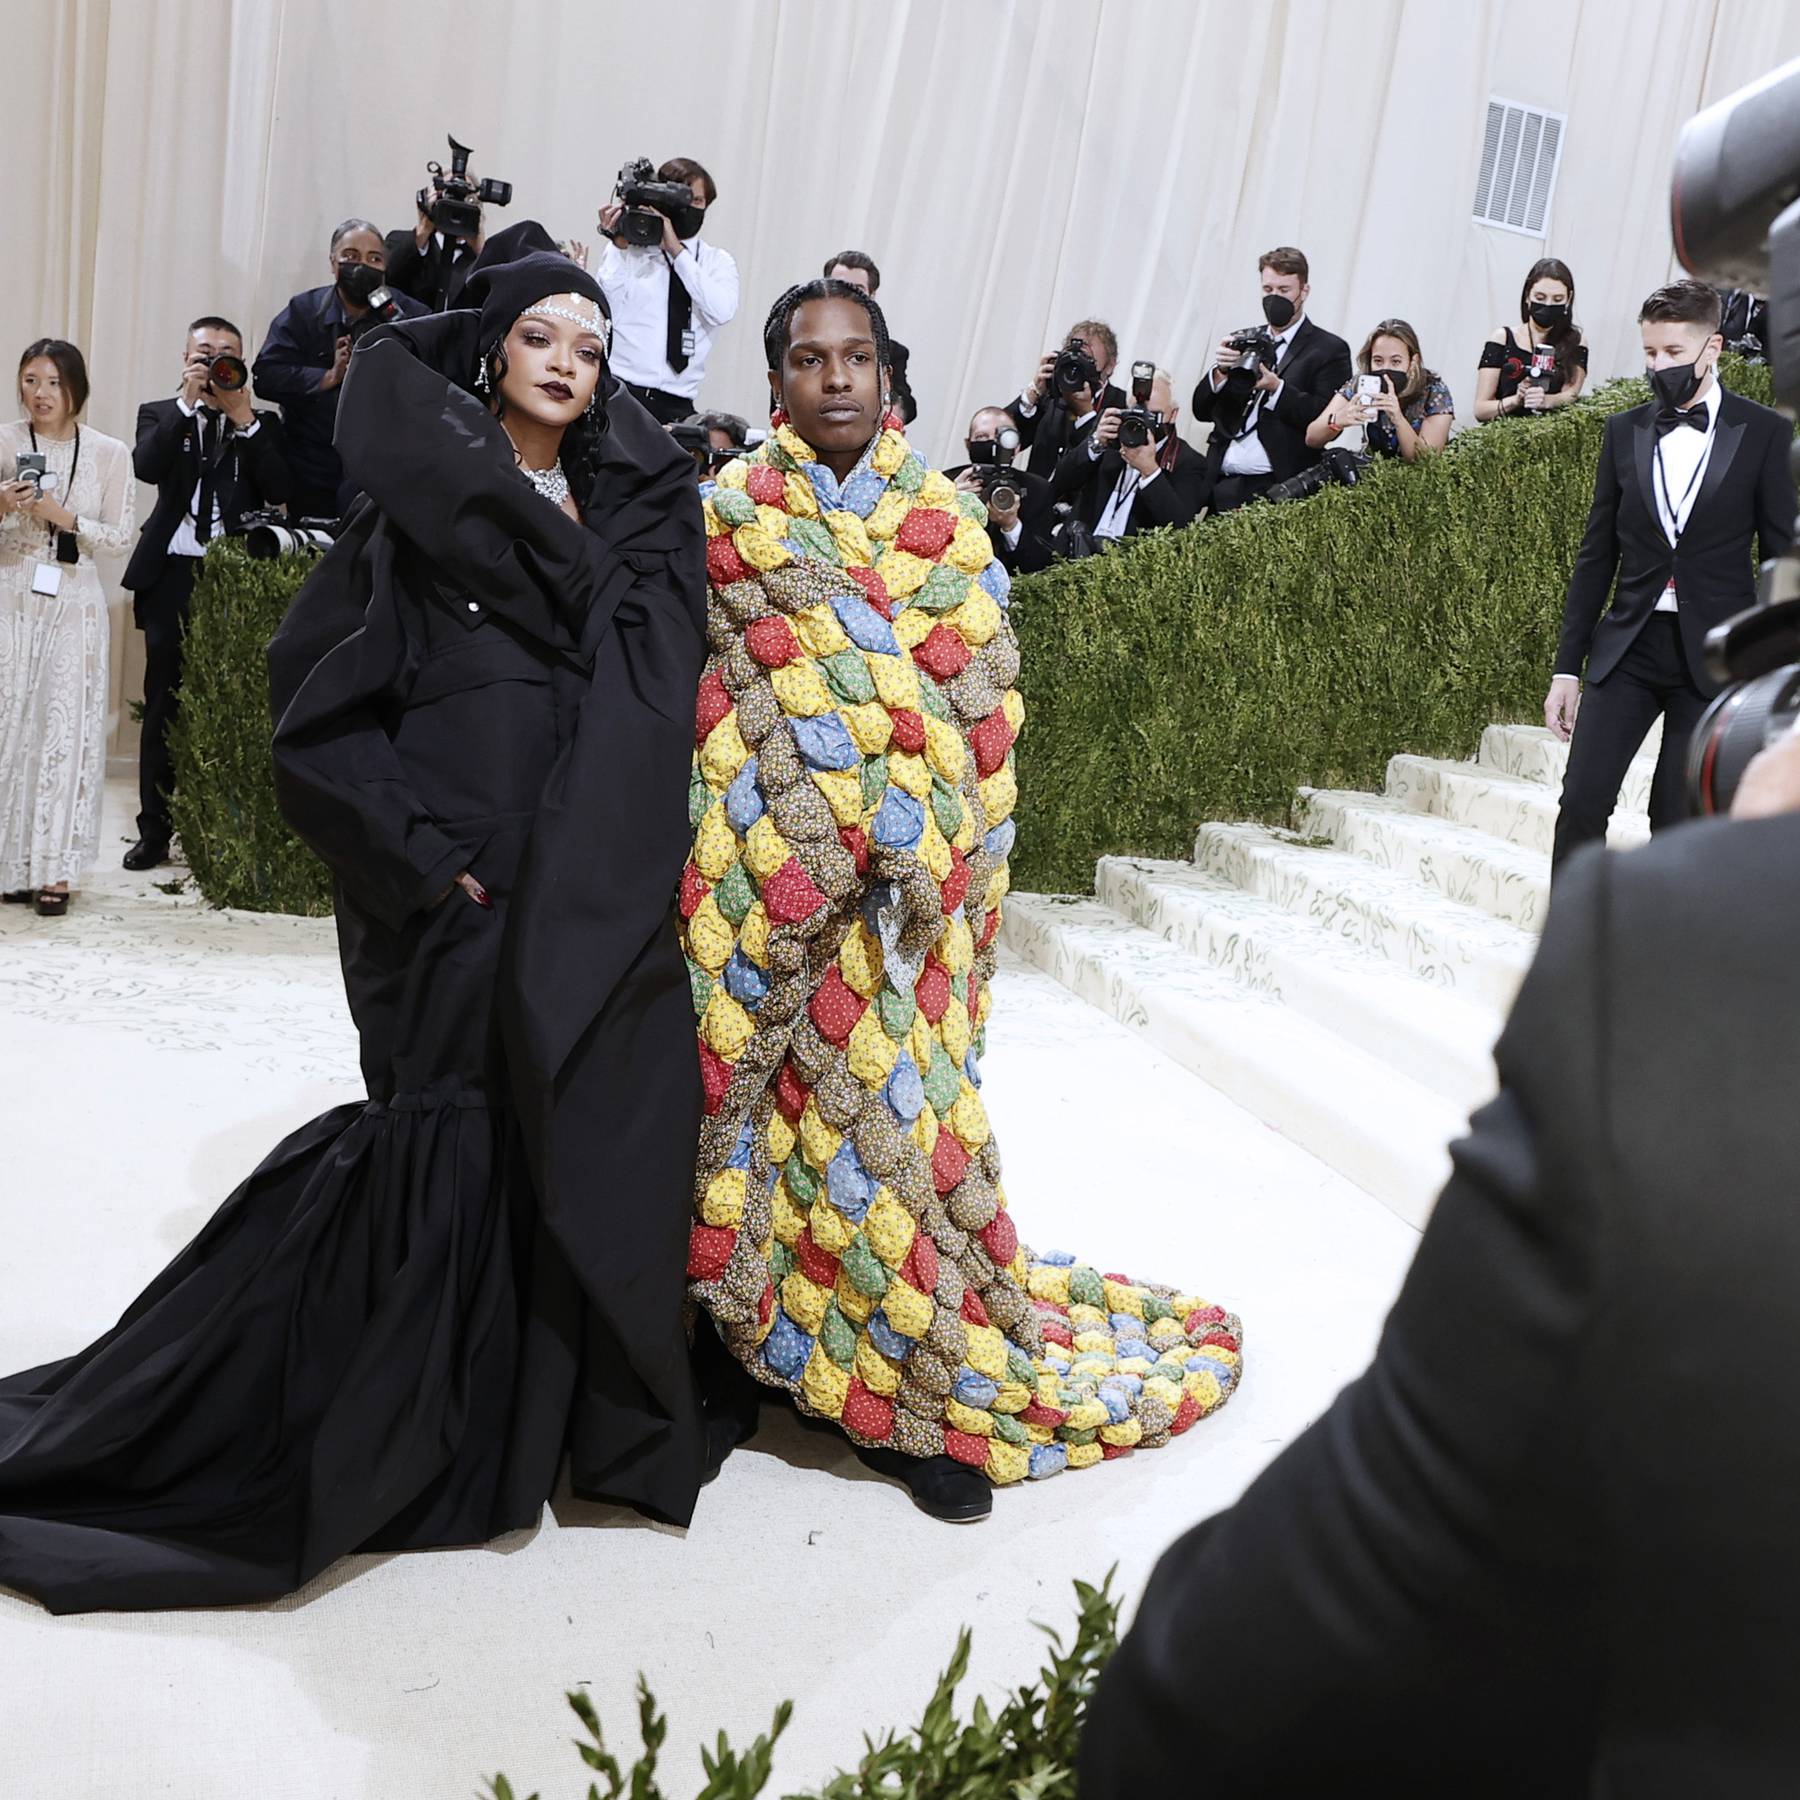 Redefining Relevance at the Met Gala